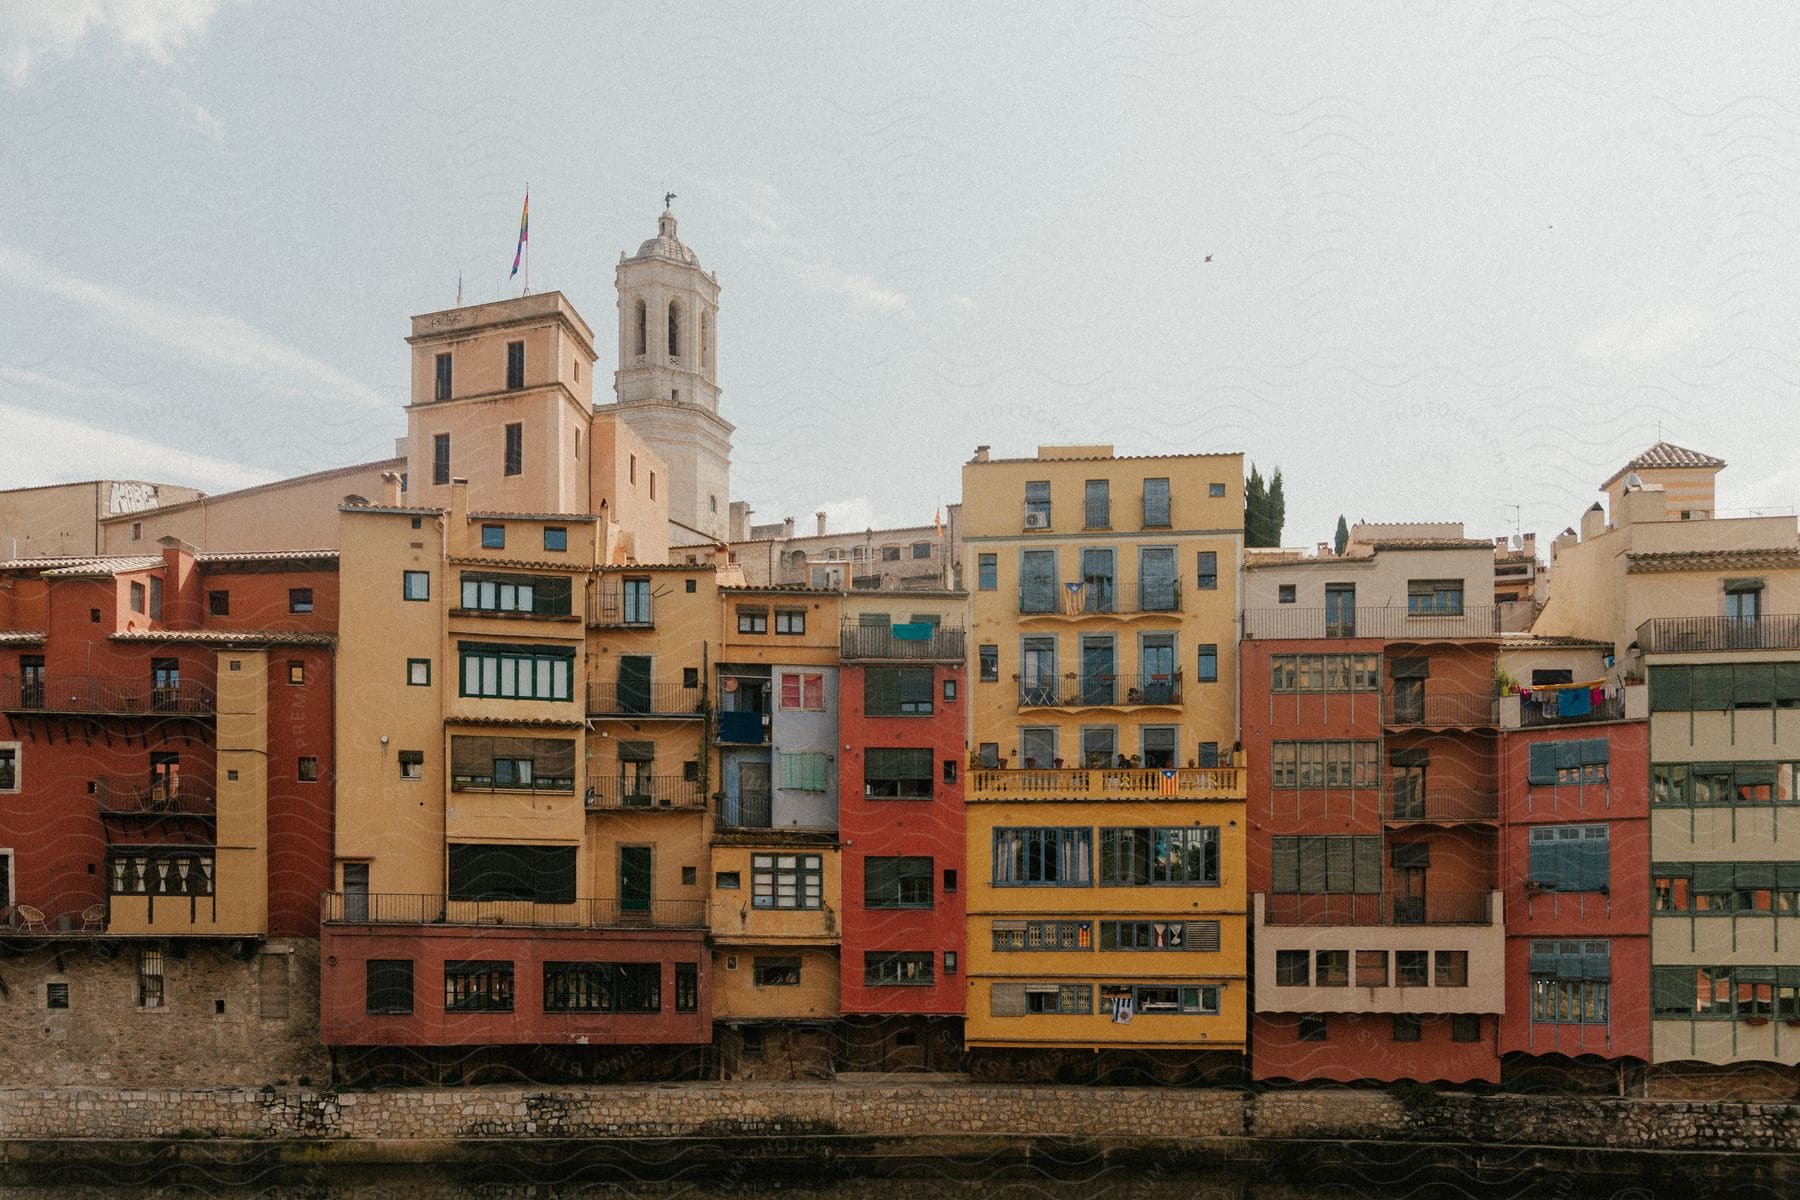 A series of colorful buildings lined up along the bank of a river. The buildings are brightly colored, including shades of yellow, red, orange and green.